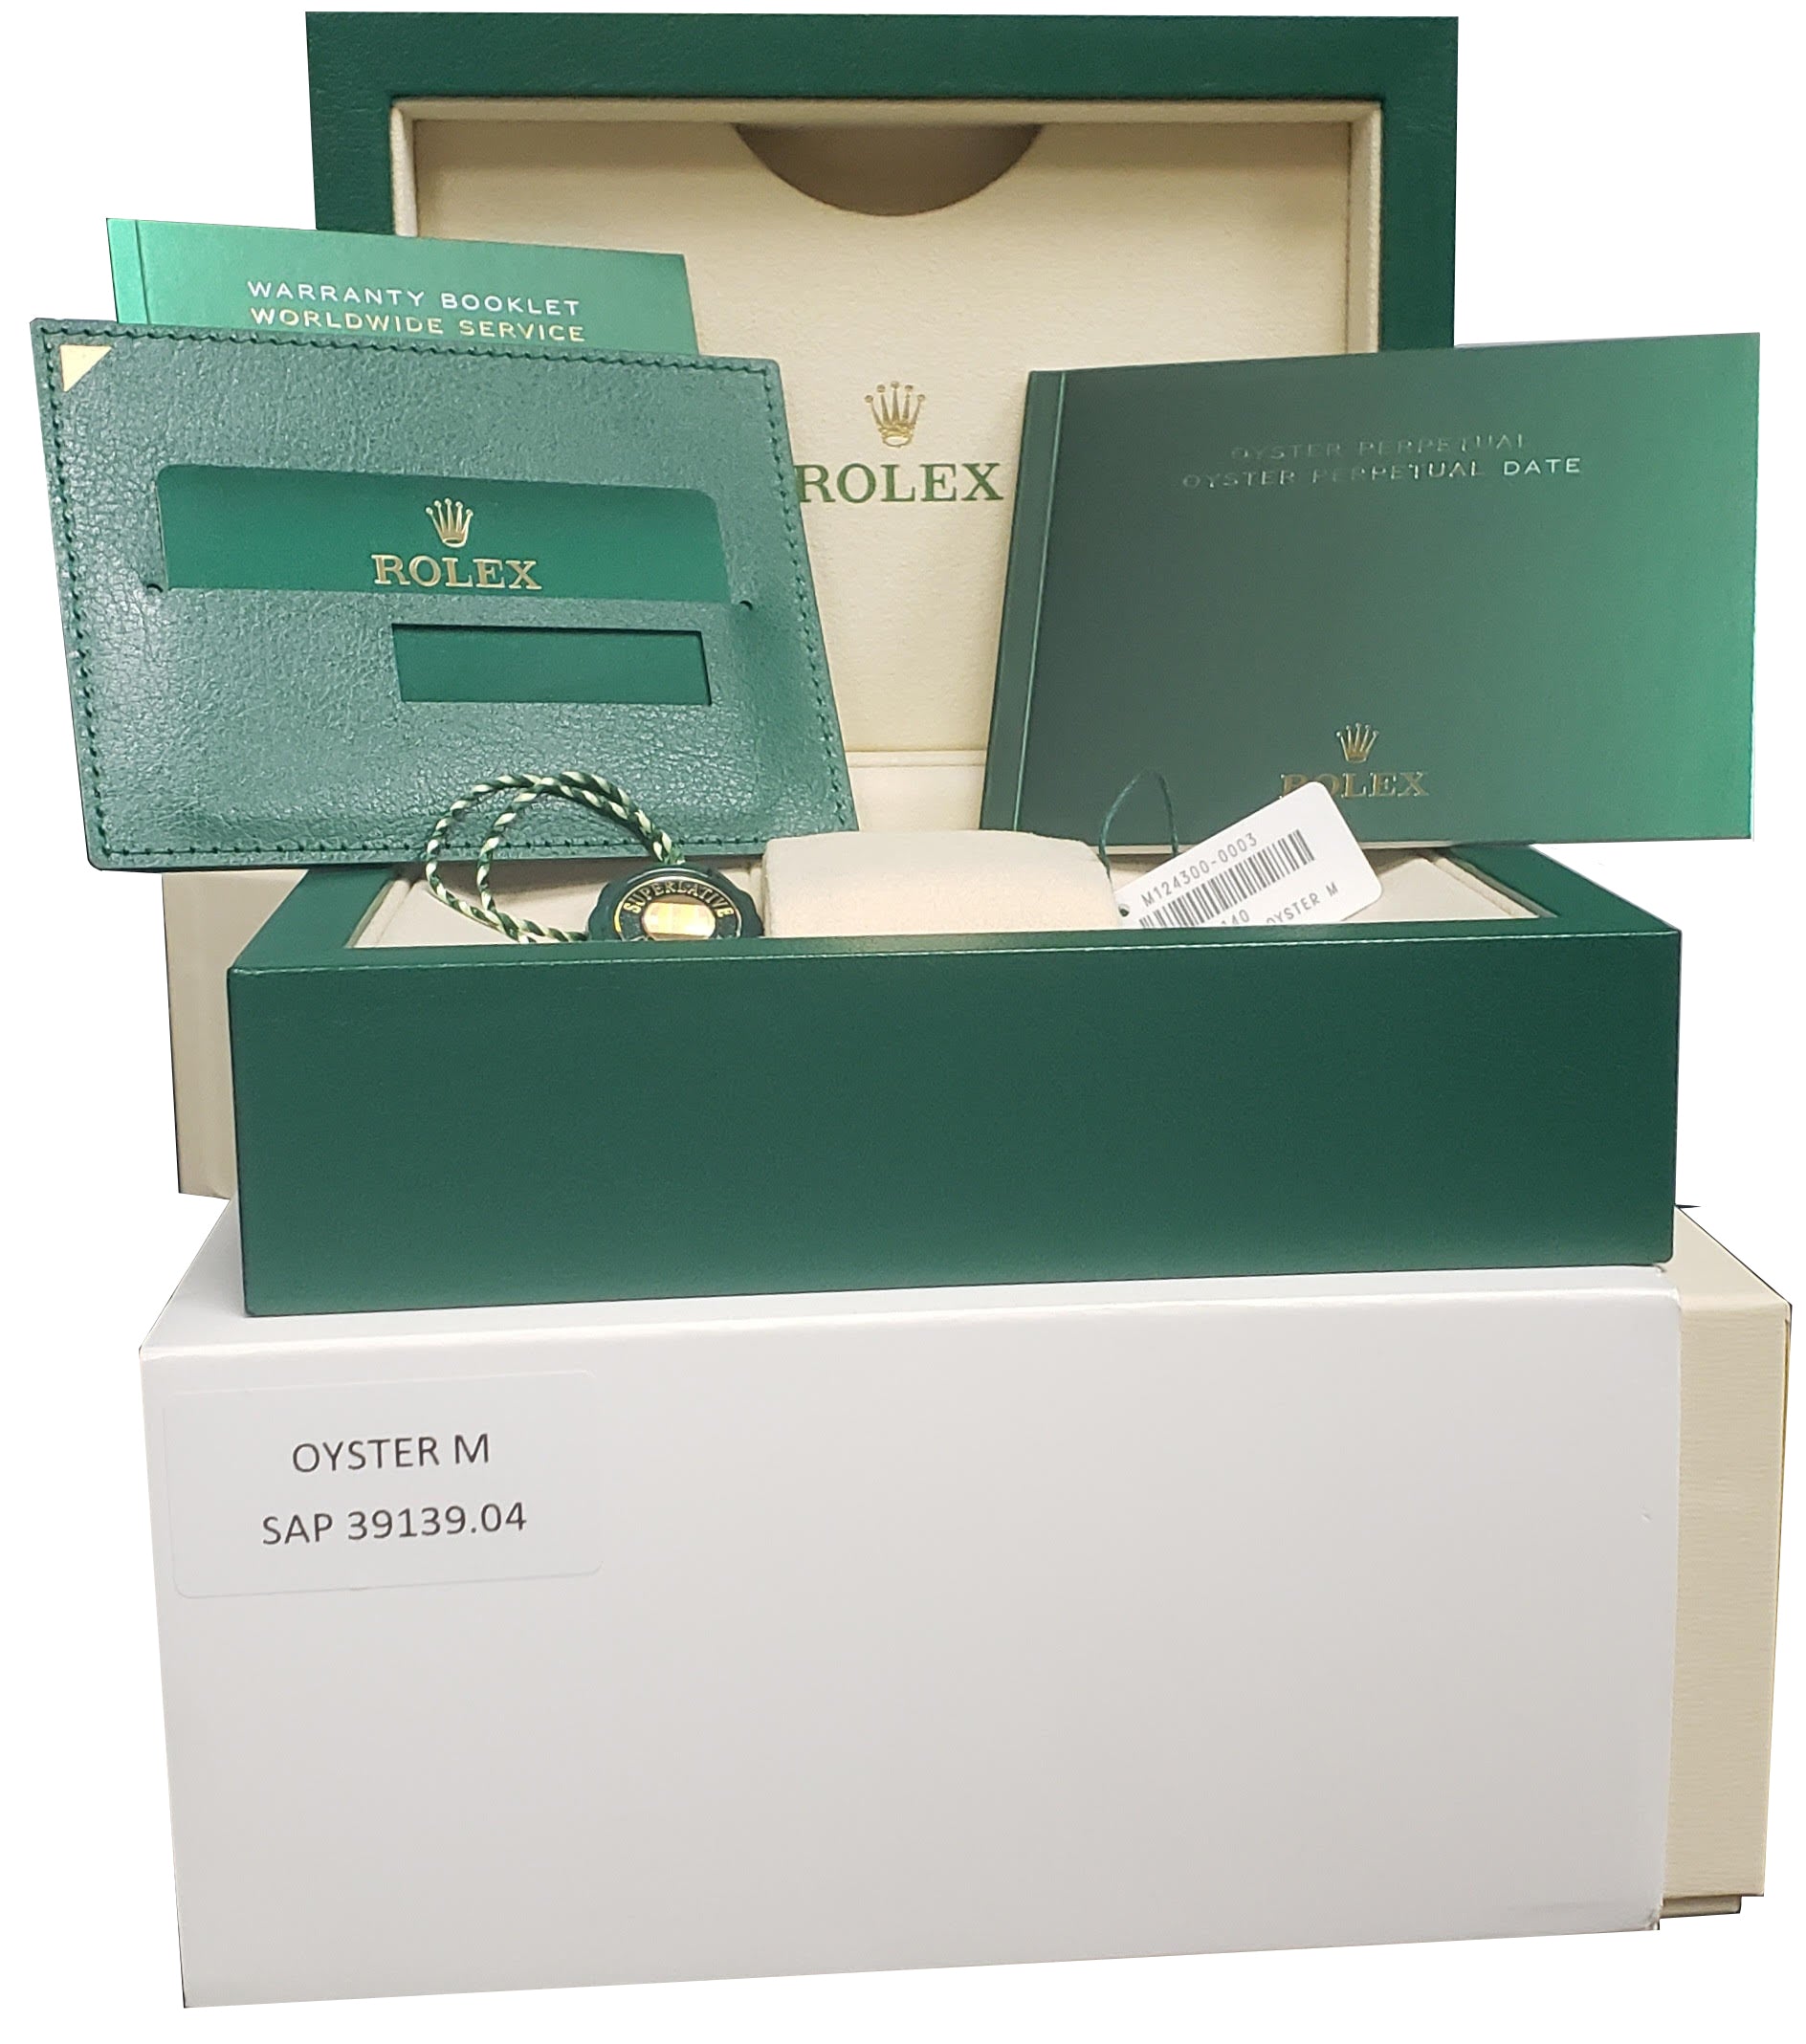 BRAND NEW 2020 Rolex Oyster Perpetual 41mm BLUE Stainless Oyster Watch 124300